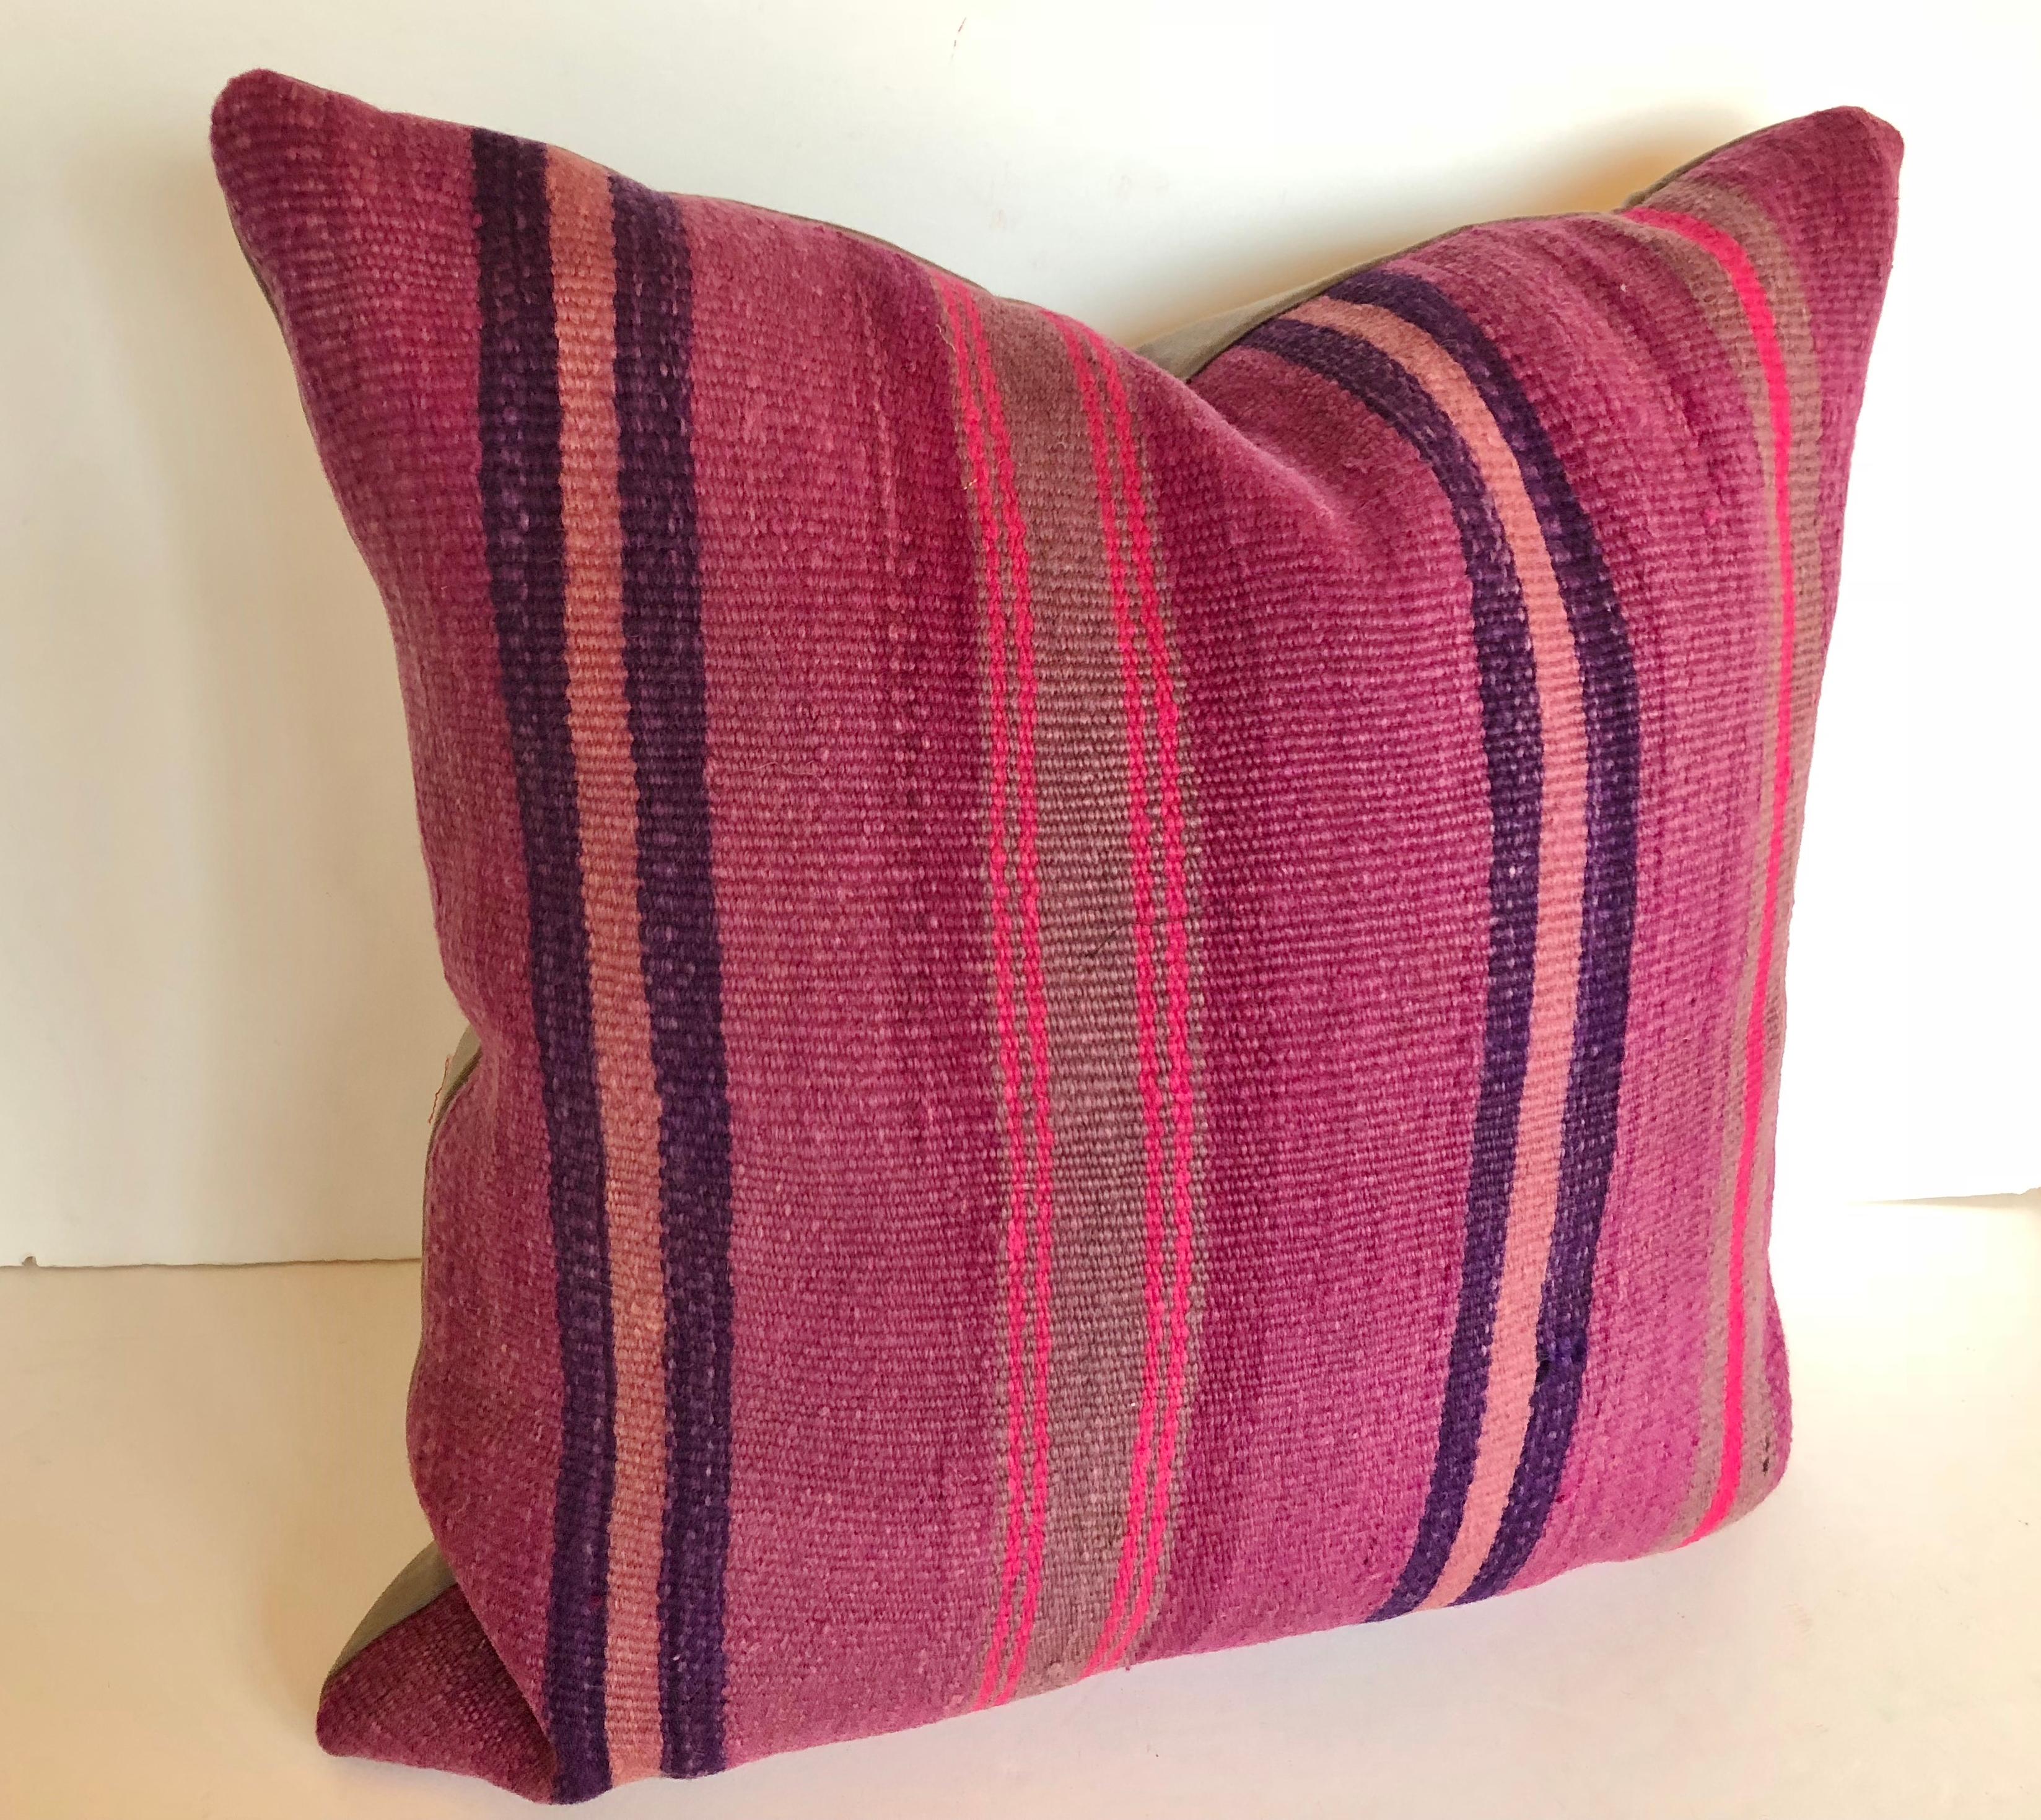 Custom pillow cut from a vintage Moroccan hand loomed wool Berber rug from the Atlas Mountains. Wool is soft and lustrous with stripes in shades of purple, navy and rose. Pillow is filled with an insert of 50/50 down and feathers, backed in a wool